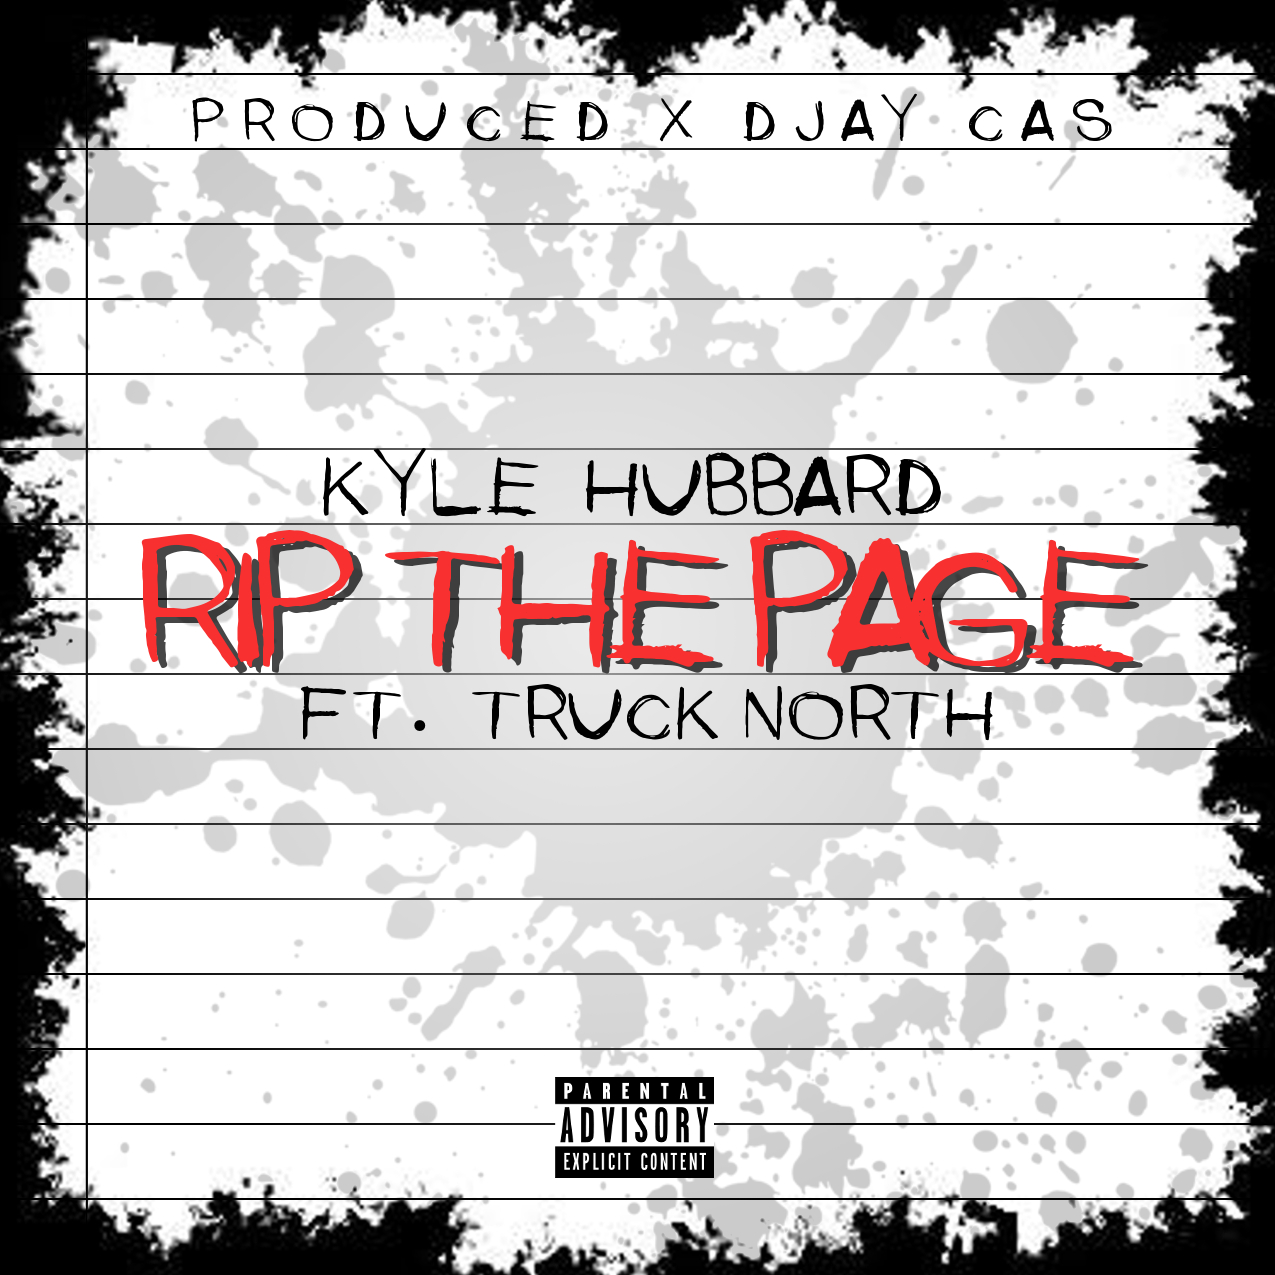 Kyle Hubbard – Rip The Page (ft. Truck North) – prod. DJay Cas